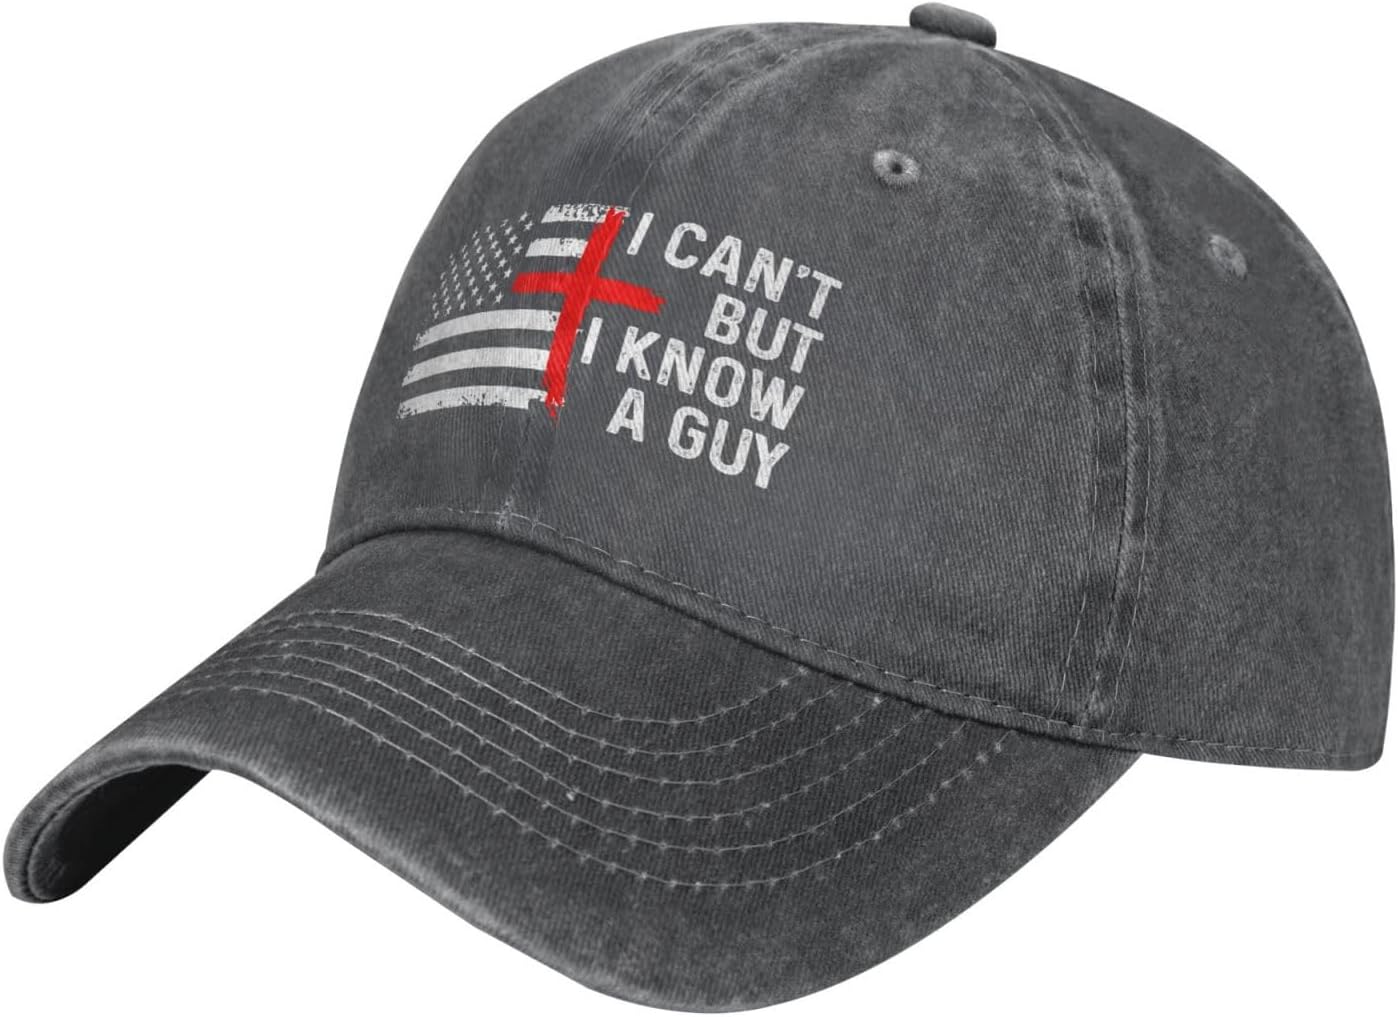 I Can't But Know an Guy Christian Hat claimedbygoddesigns